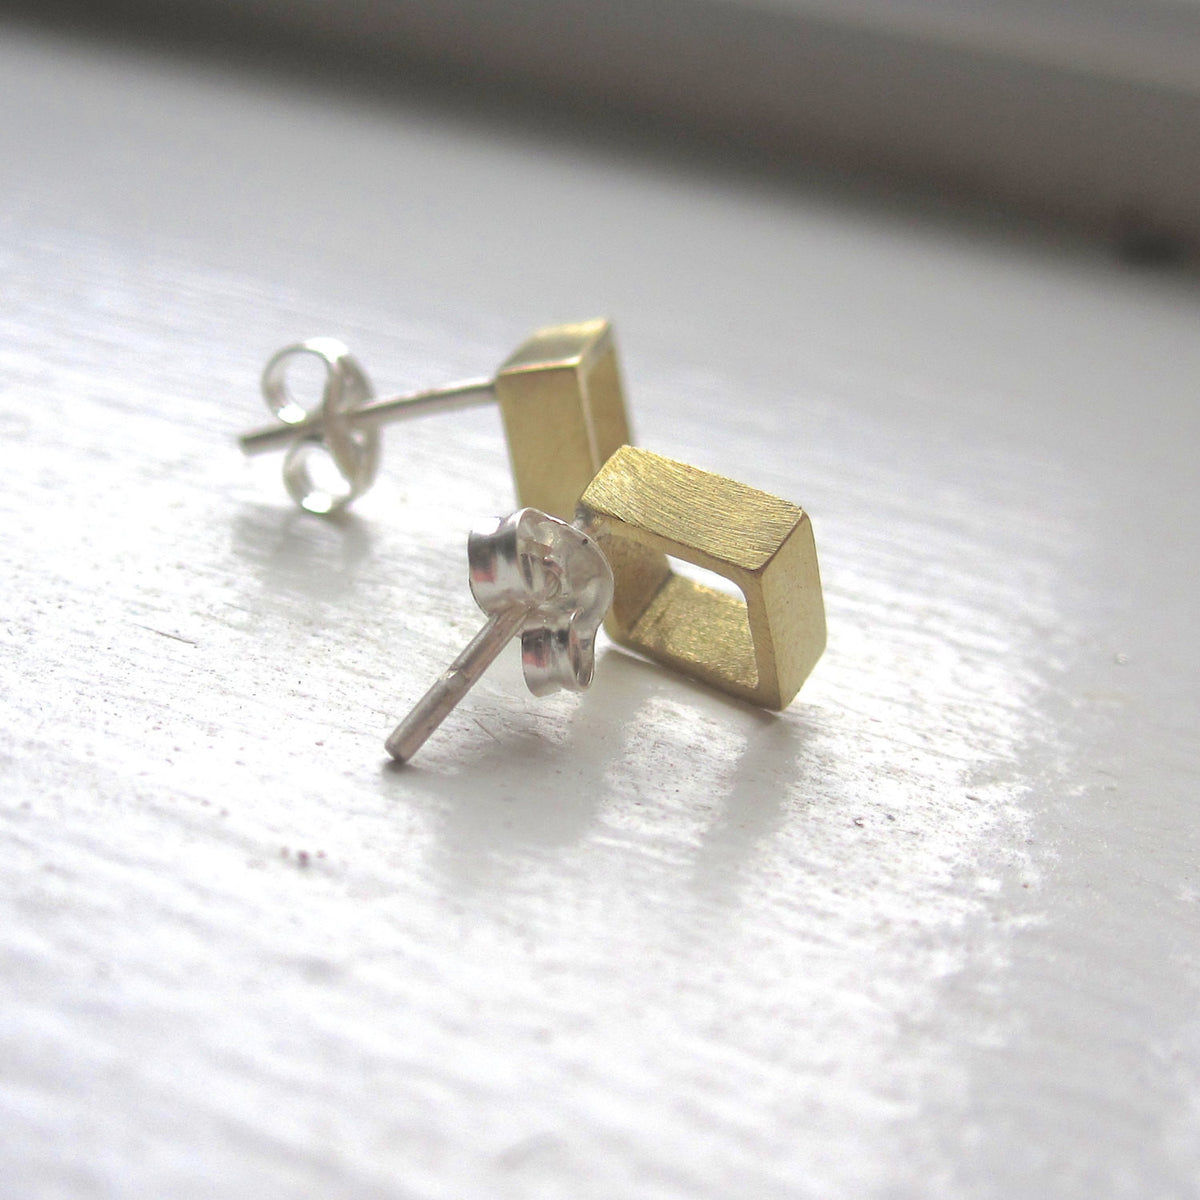 Open Hand-Made Square Cube Stud Earrings in Gold Colored Brass - 0124 - Virginia Wynne Designs